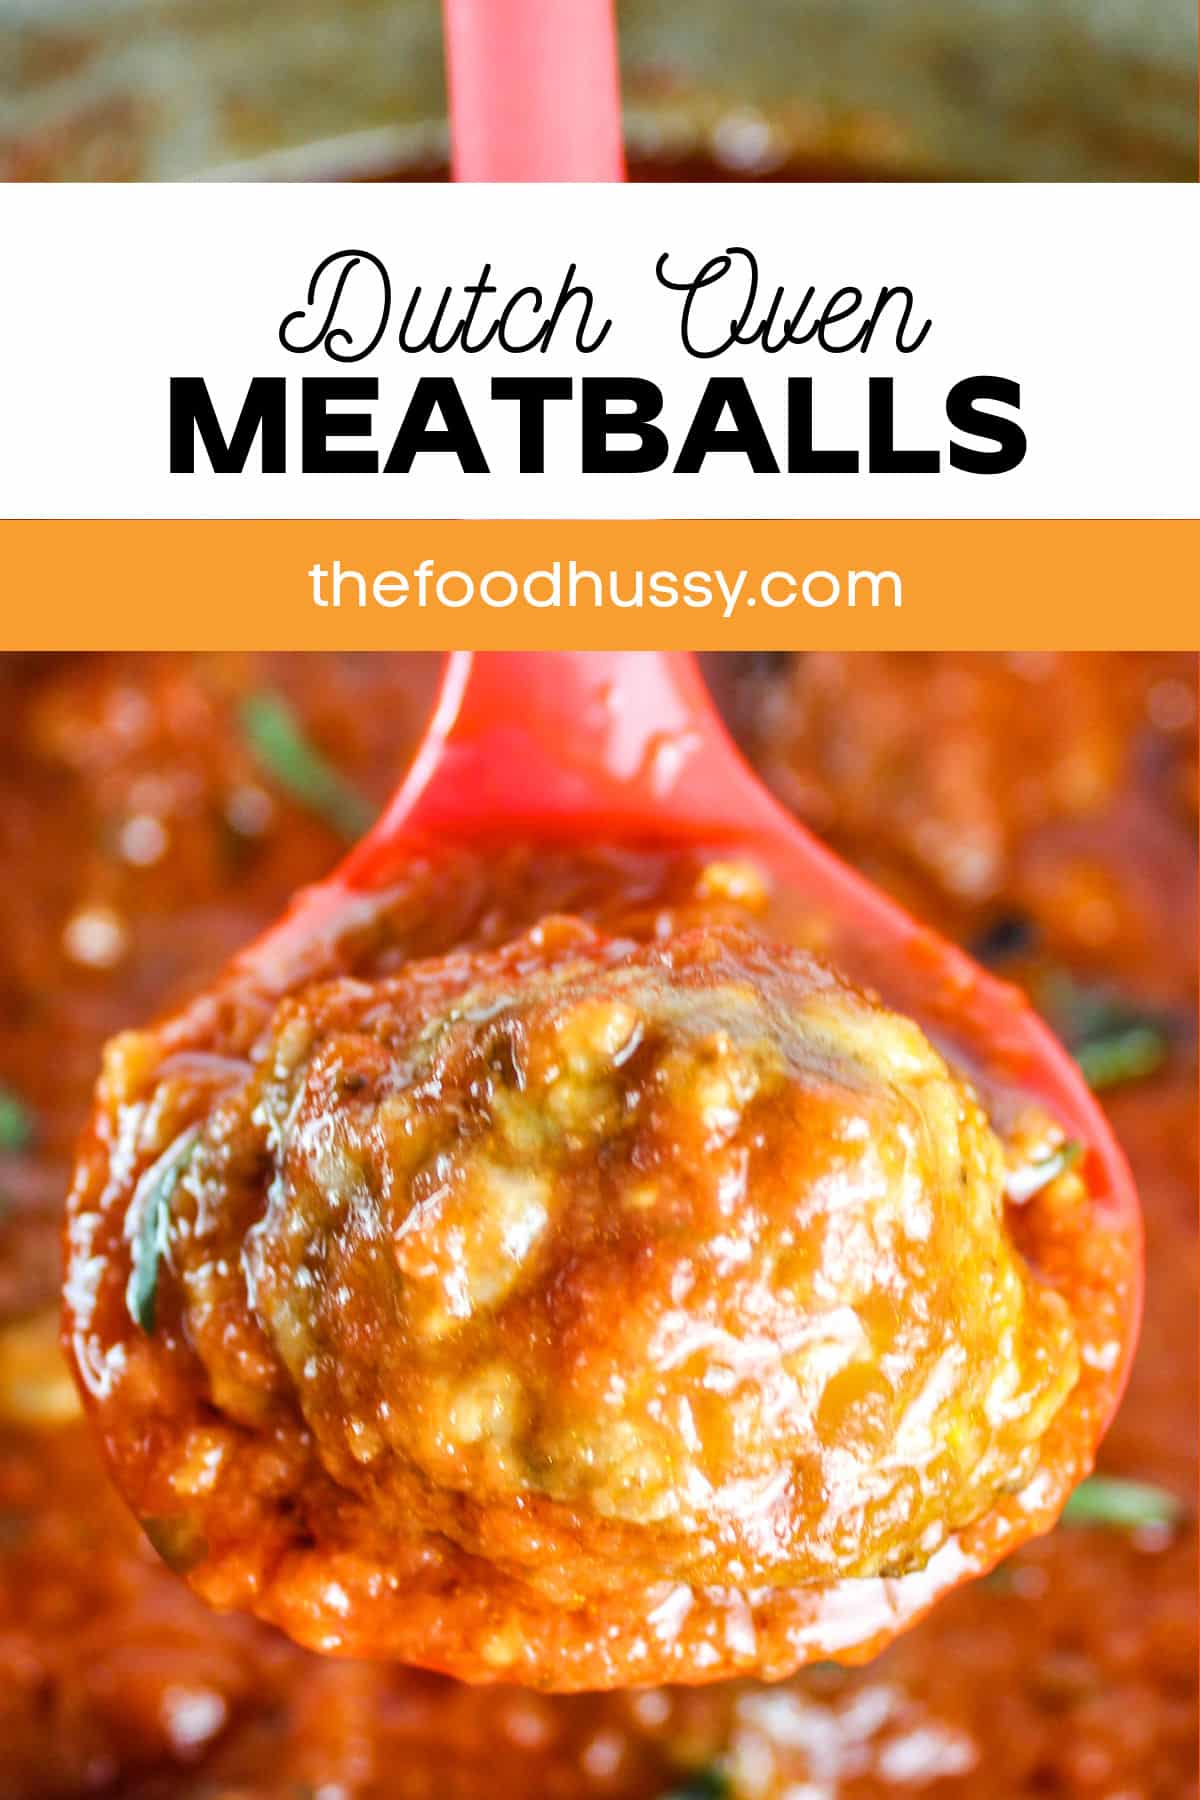 Tender meatballs simmered in a homemade Italian tomato sauce - all done in under an hour. These Dutch Oven Meatballs & Sauce are so delicious - your family will think you've been slaving away in the kitchen for hours!  via @foodhussy